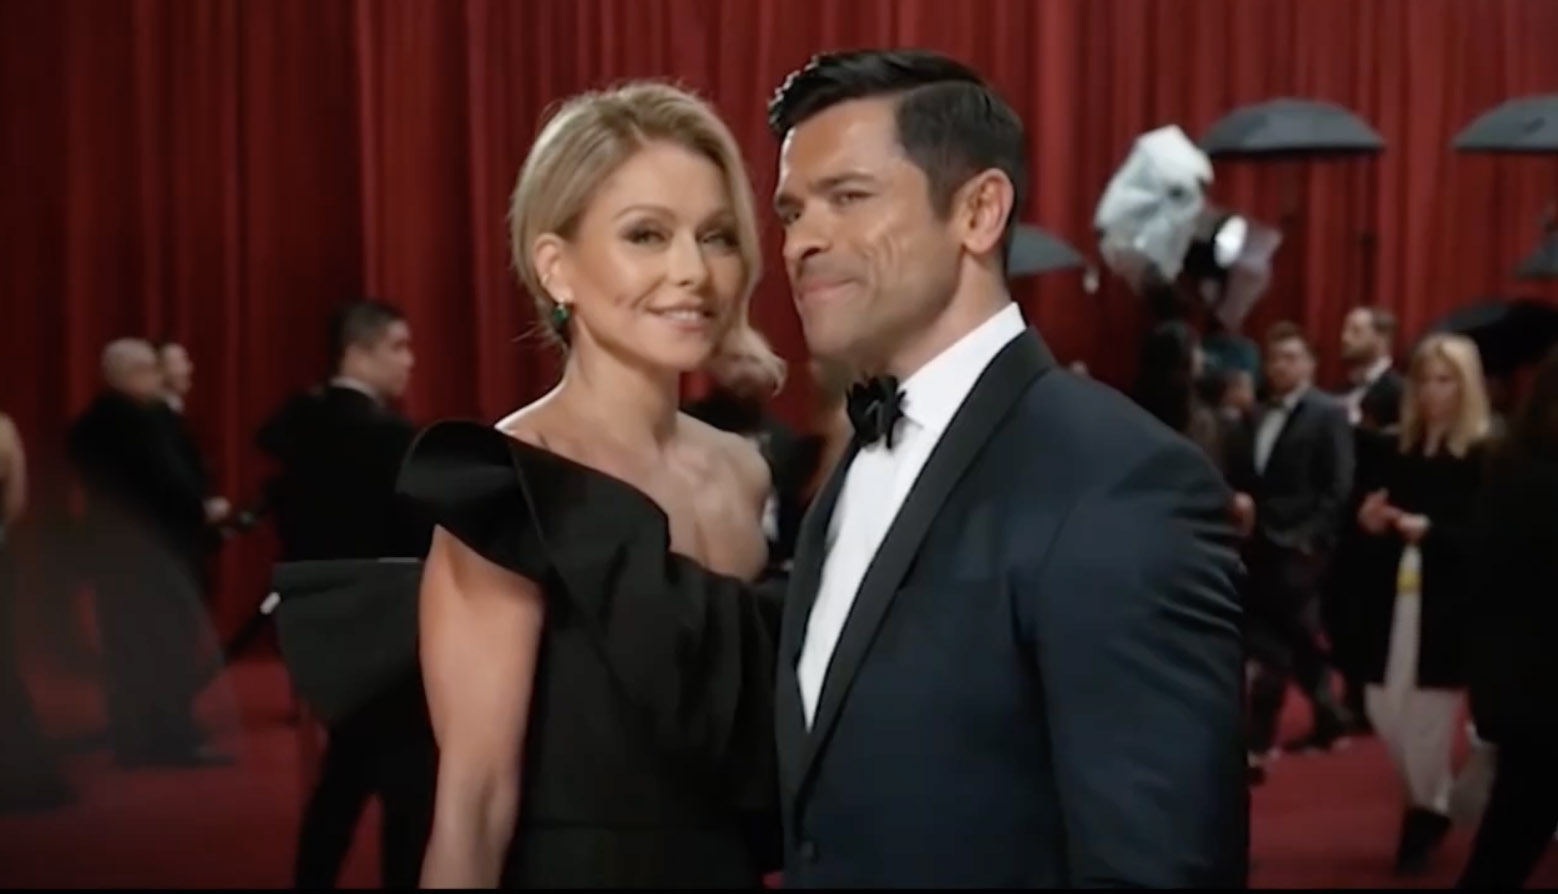 Kelly and husband Mark Consuelos are taking Live back to Los Angeles, California, for the Oscars After Party